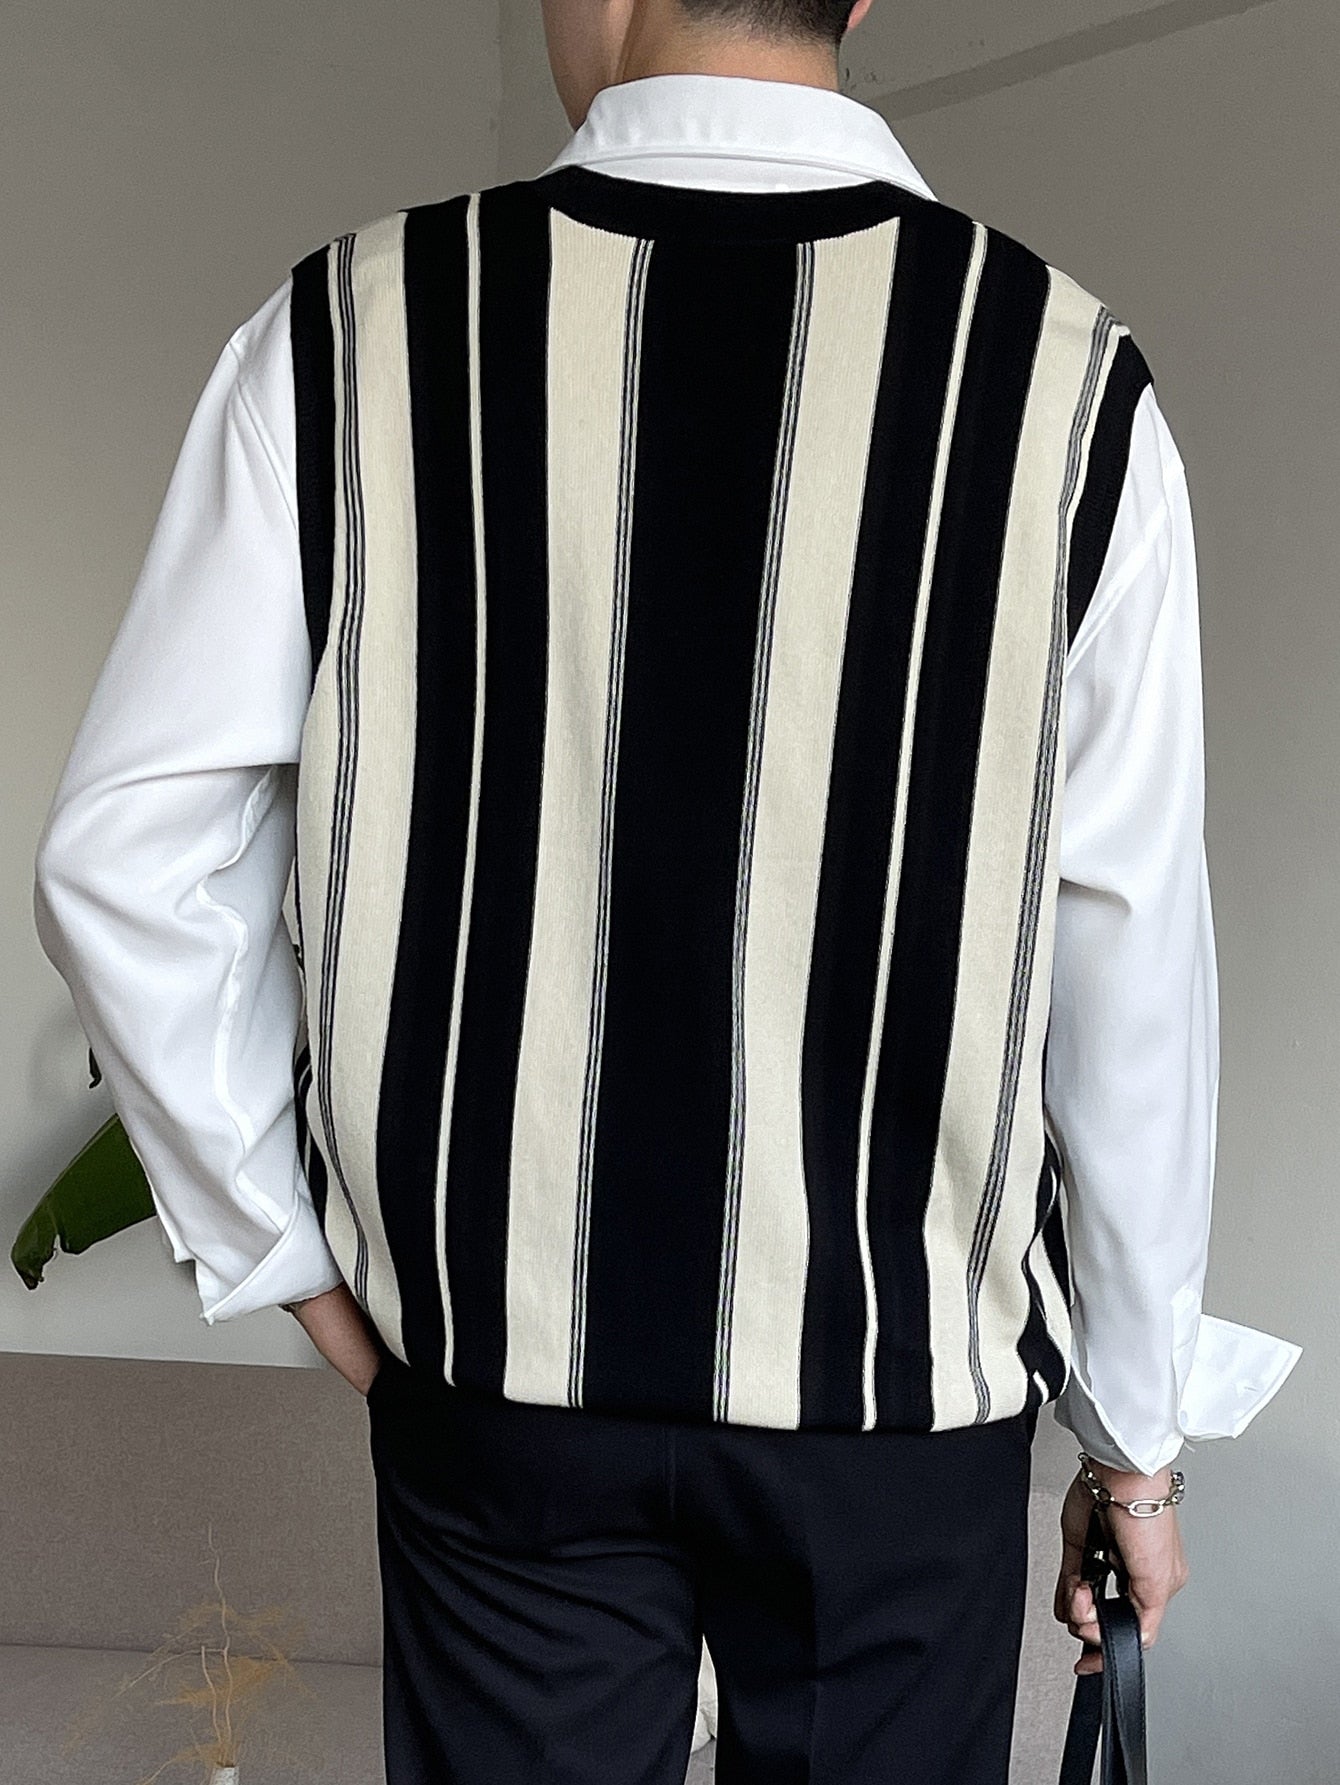 Men Striped Pattern Colorblock Sweater Vest Without Shirt